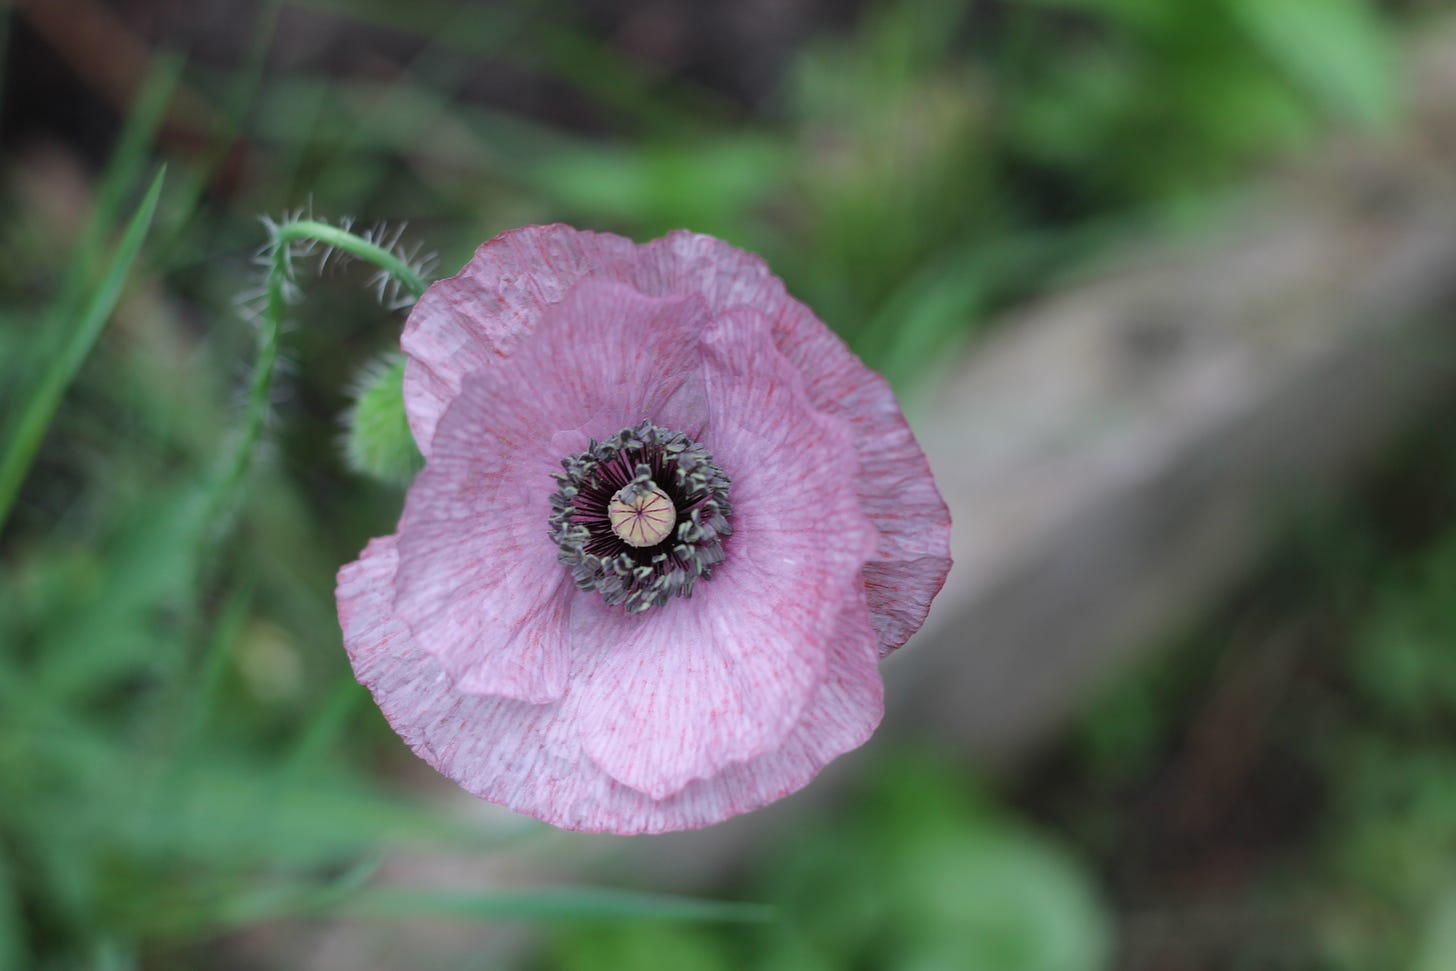 A single plum coloured poppy with three layers of petals and grey sepals